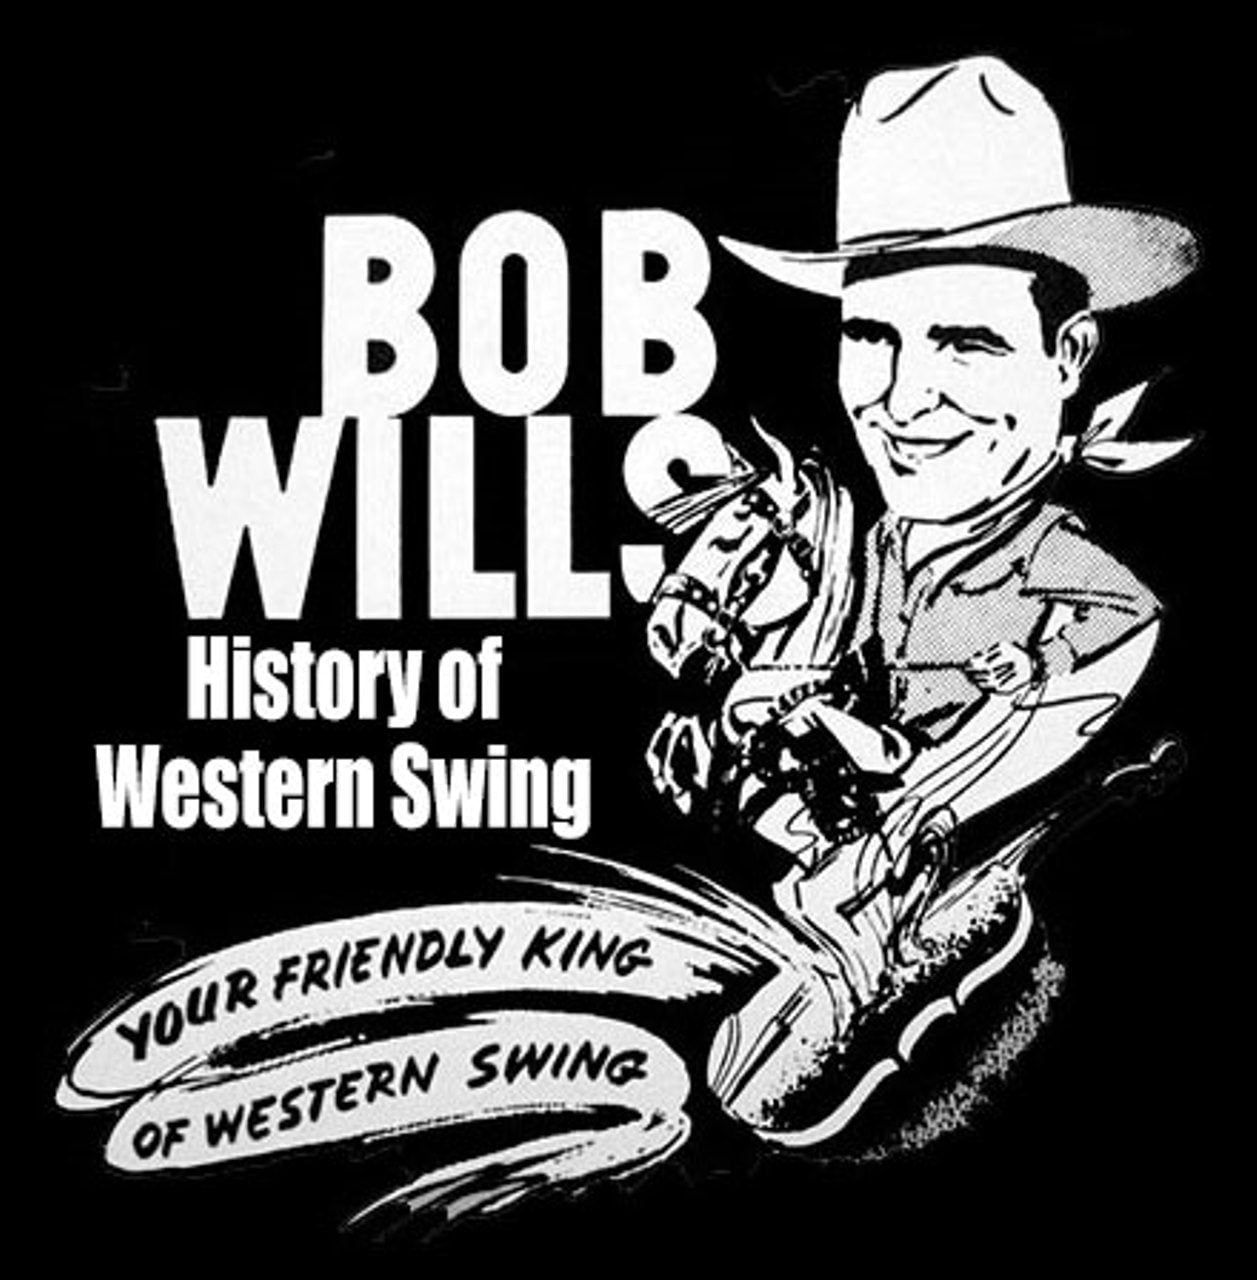 Bob Wills – Your Friendly King Of Western Swing cover album